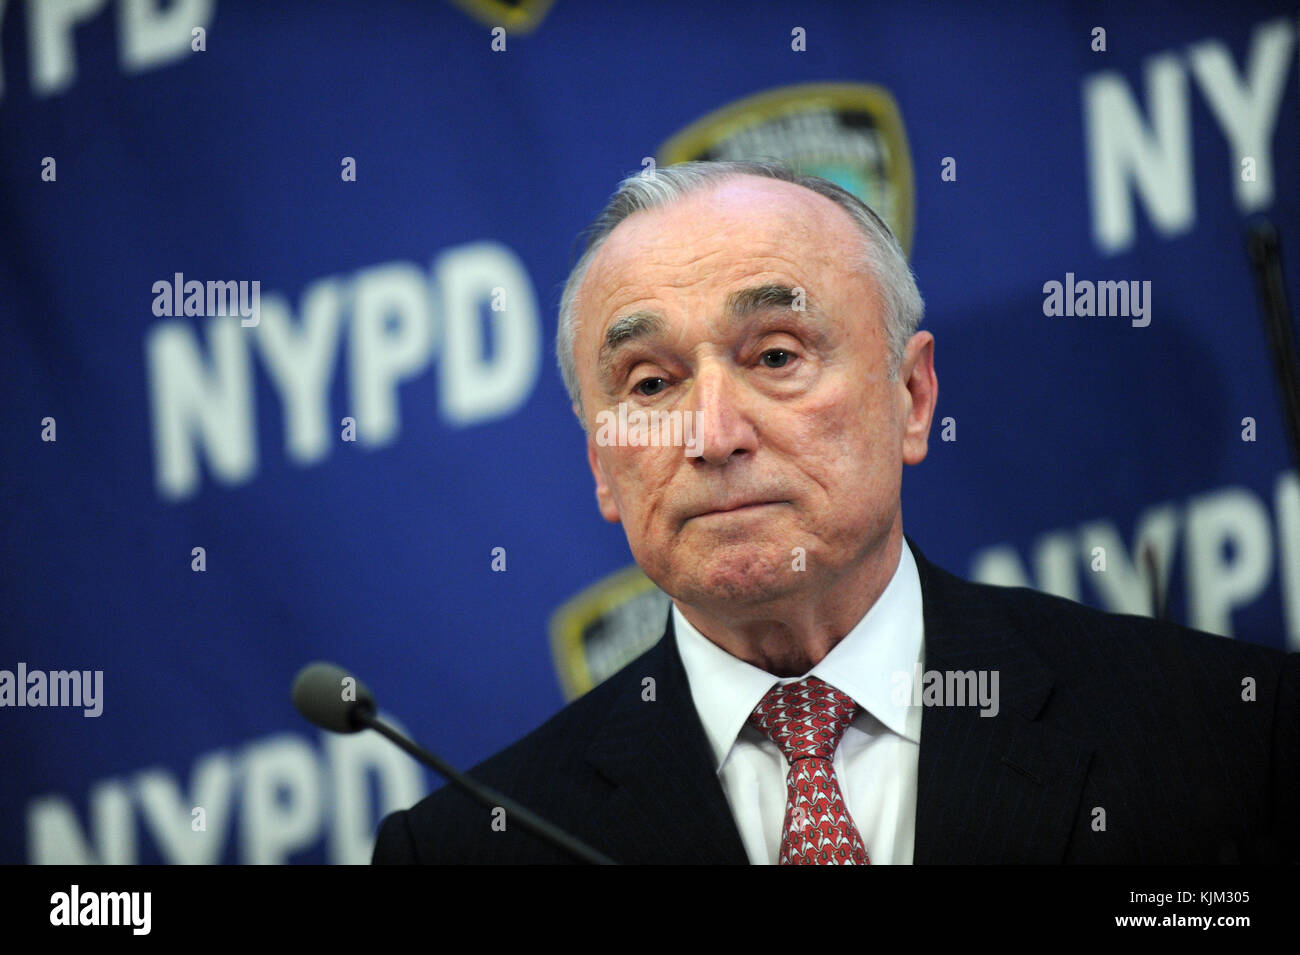 NEW YORK, NY - FEBRUARY 23: New York Mayor Bill de Blasio and Police Commissioner William Bratton announce CompStat 2.0 NYPD HQ on February 23, 2016 in New York City  People:  William Bratton Stock Photo